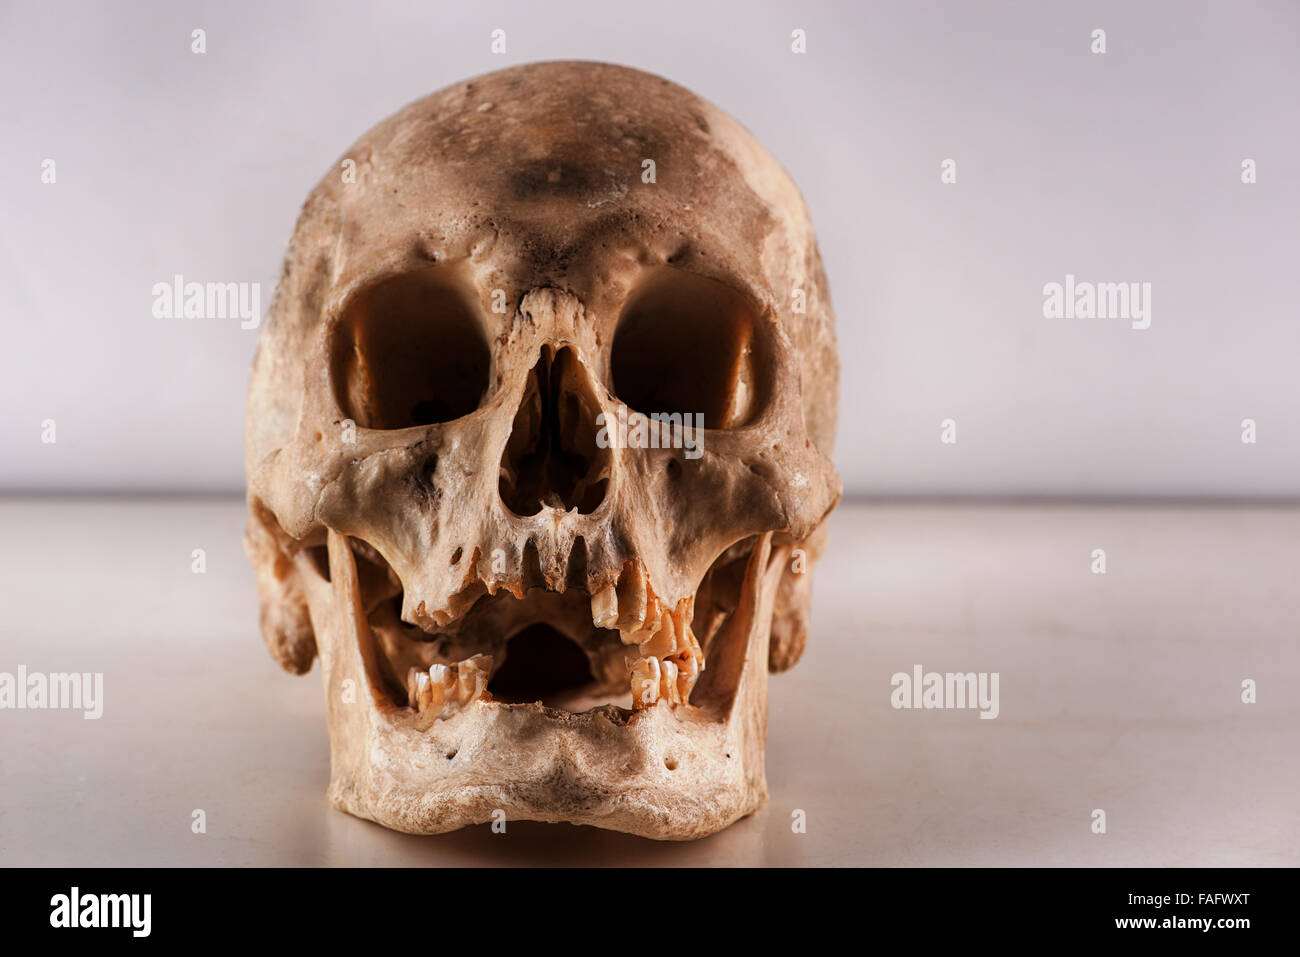 anatomy and physiology of real human skull cranium for scientific research slightly gruesome in studio pathology table Stock Photo